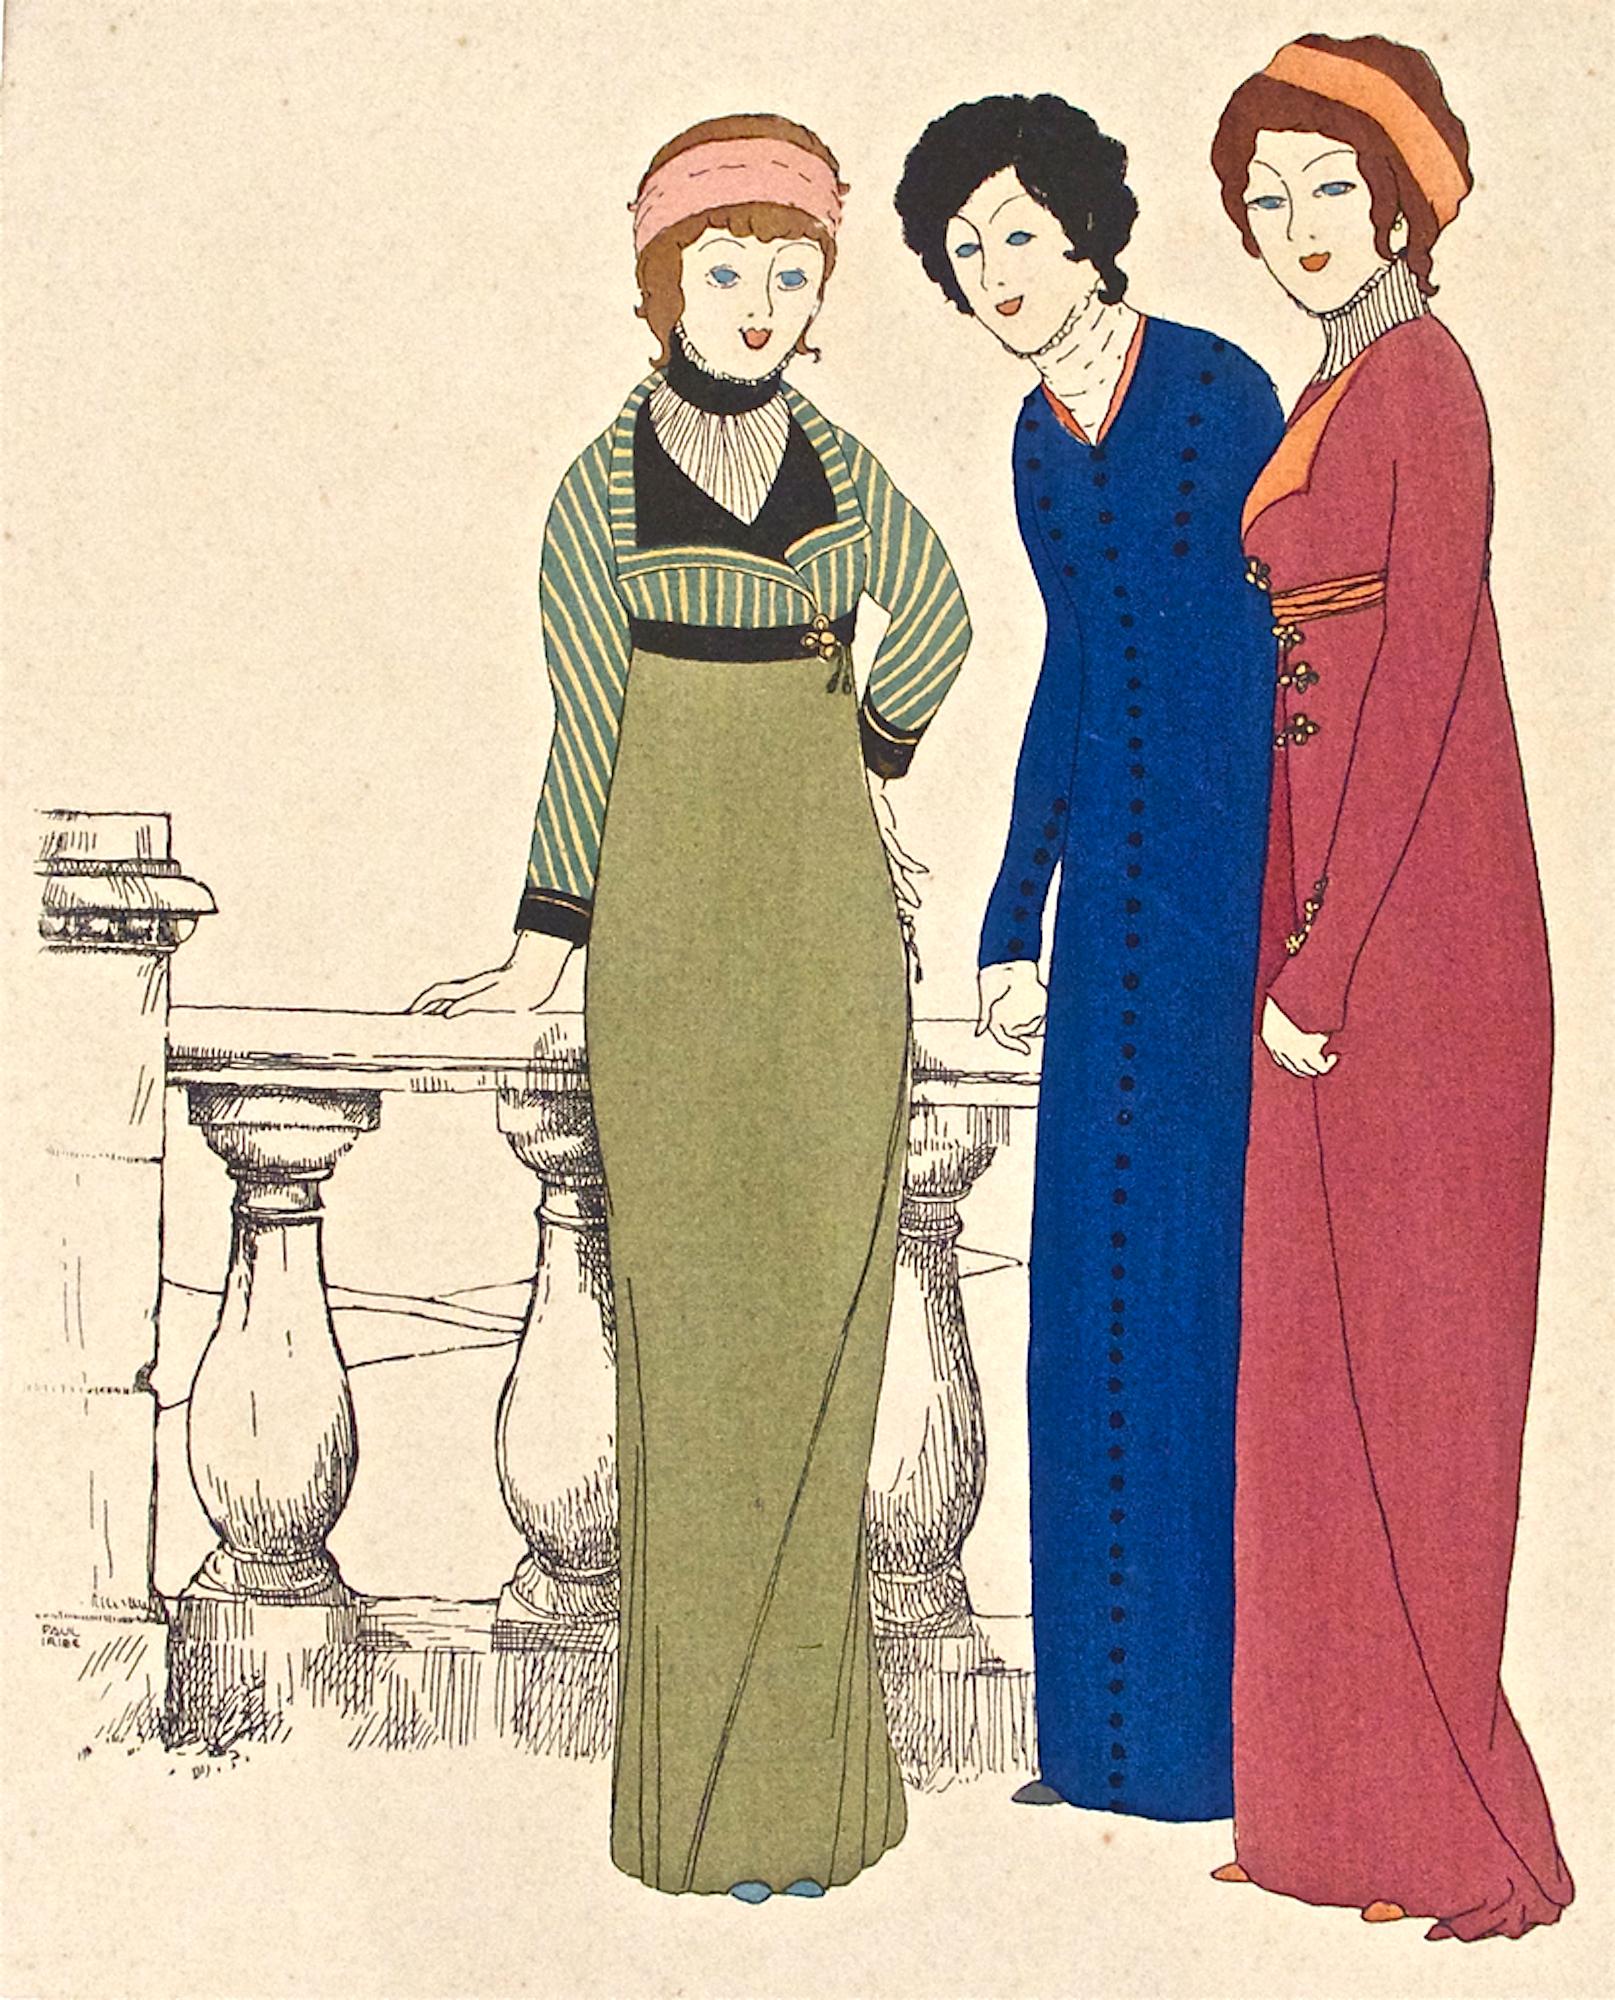 Pochoir.
Signed on plate.

One of the beautiful illustrations realized by Paul Iribe for "Les Robes de Paul Poiret" in 1908. 
